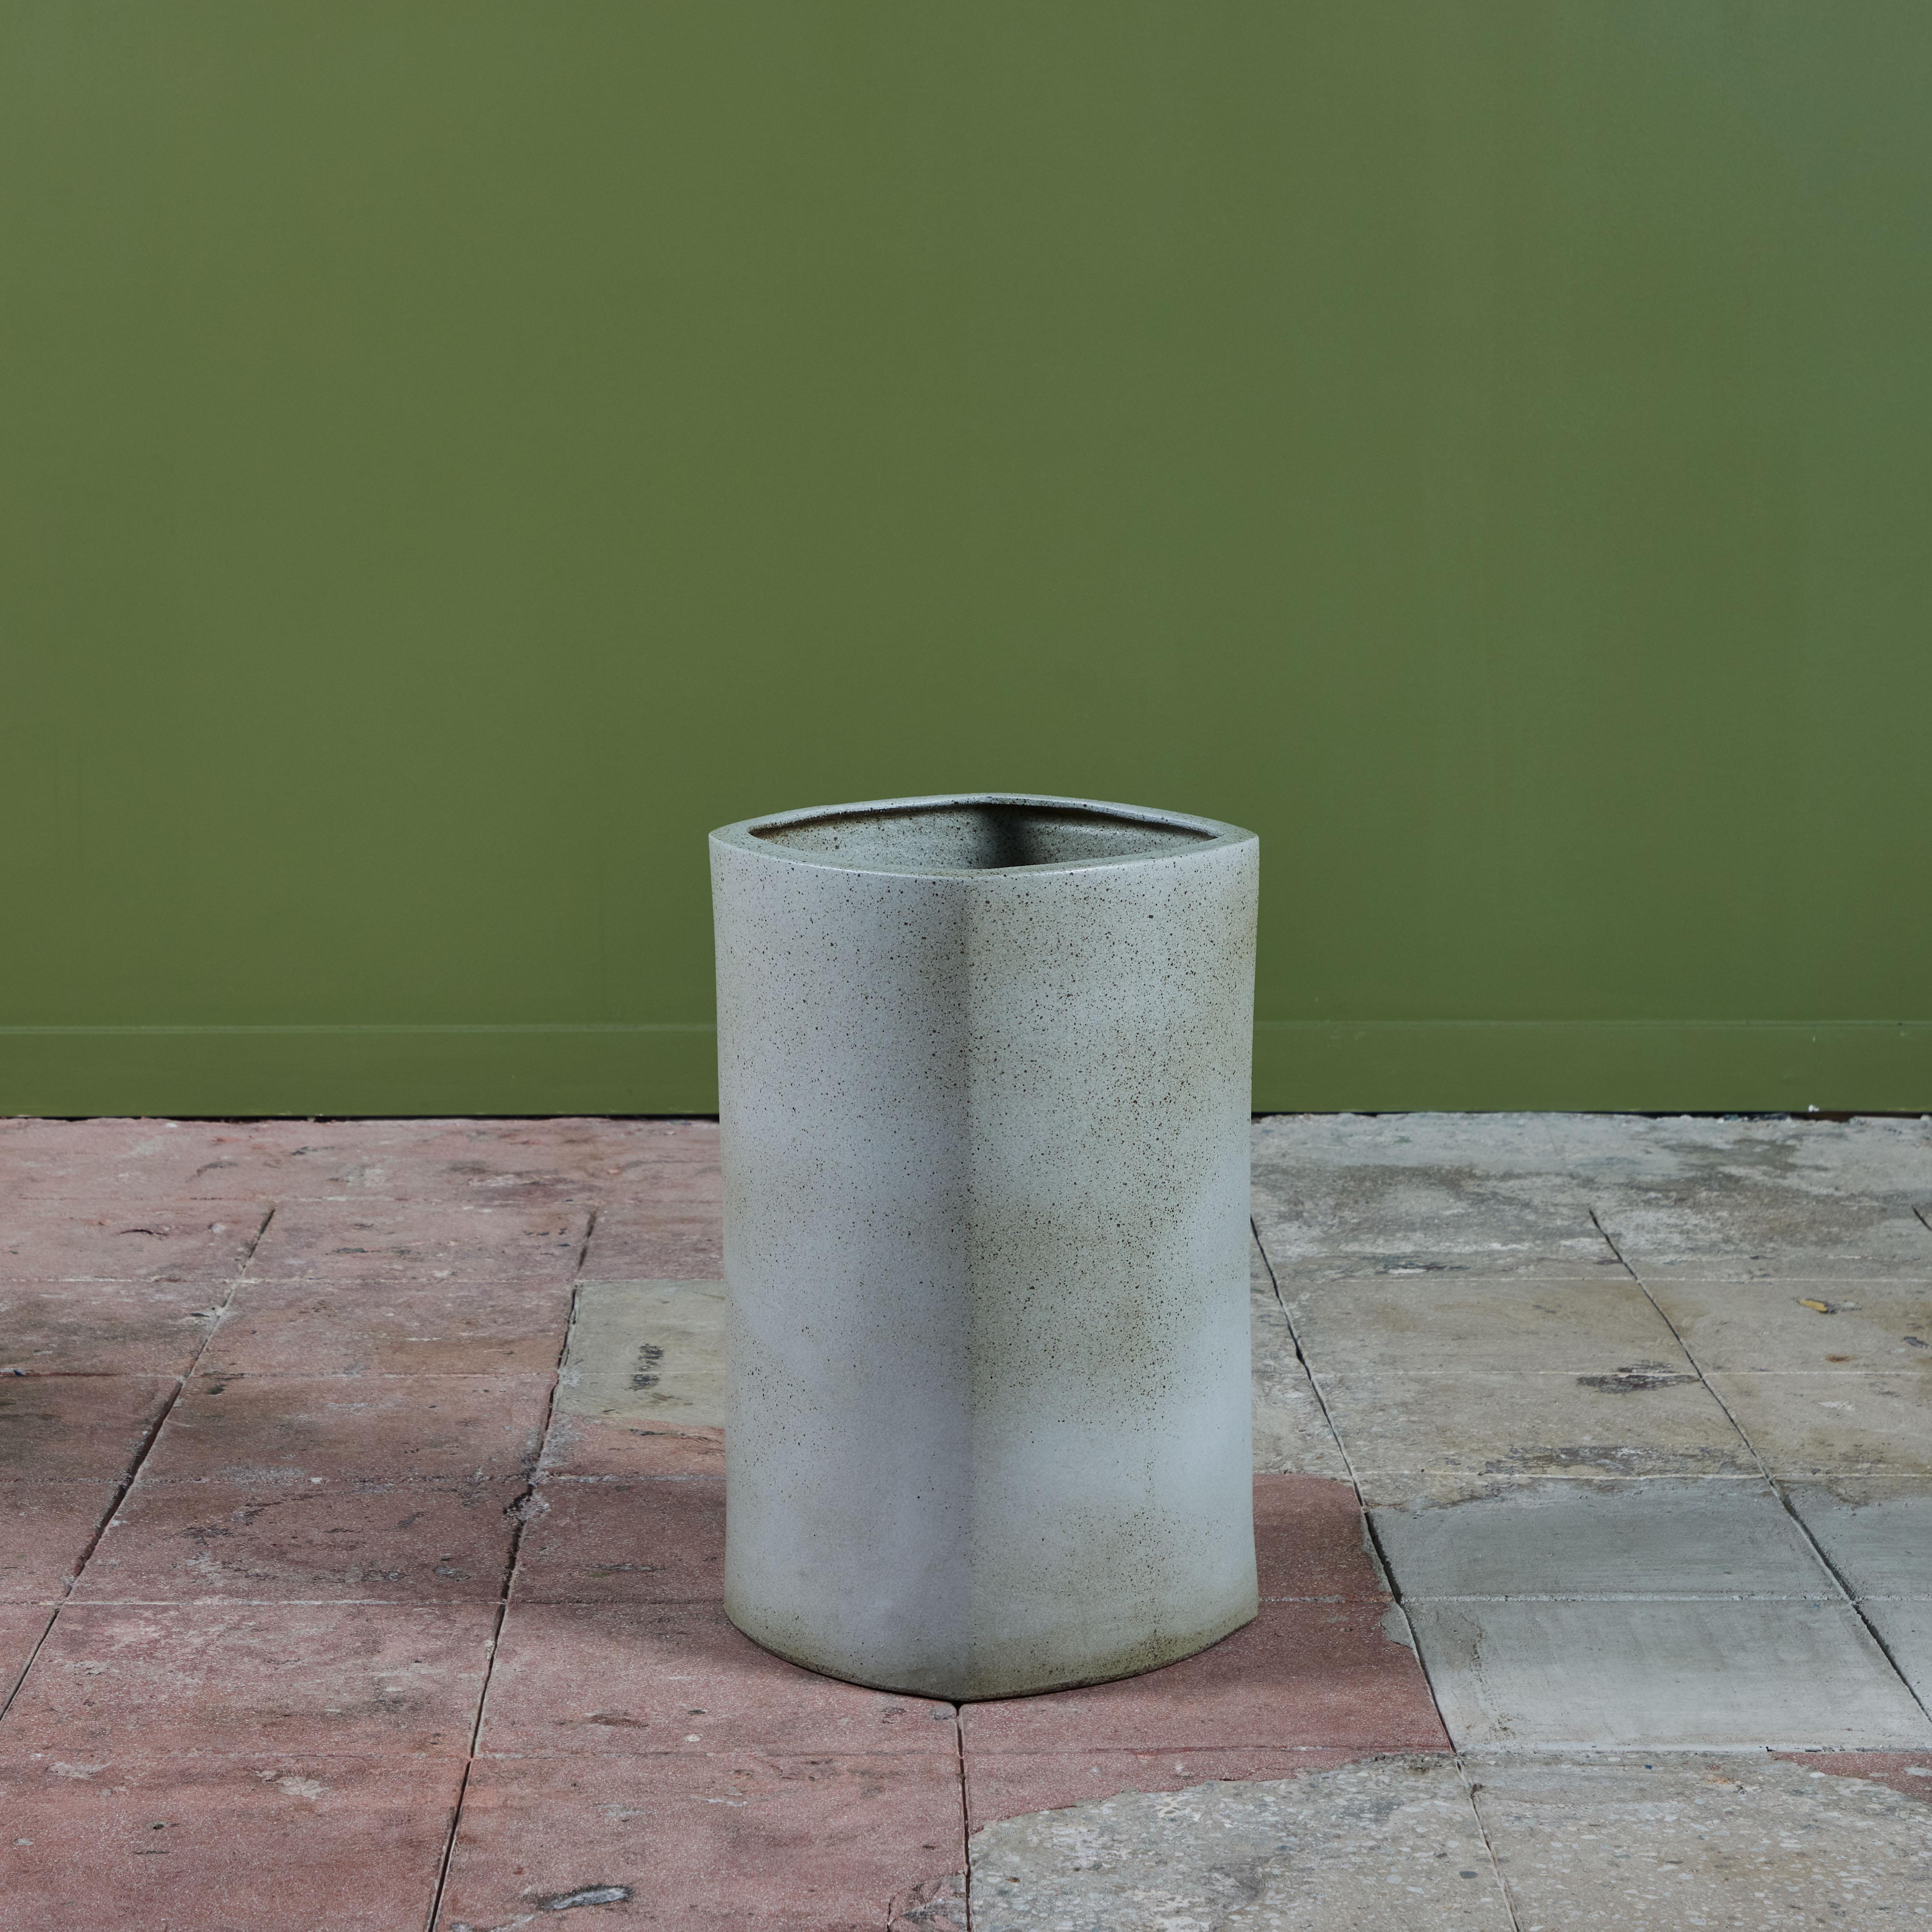 Glazed planter in a gray speckle glaze by ceramics artist Marilyn Kay Austin for Architectural Pottery. This example, features a rounded square shape. The gray glaze can be found both inside and out. Could be used as a stylish planter for indoor or